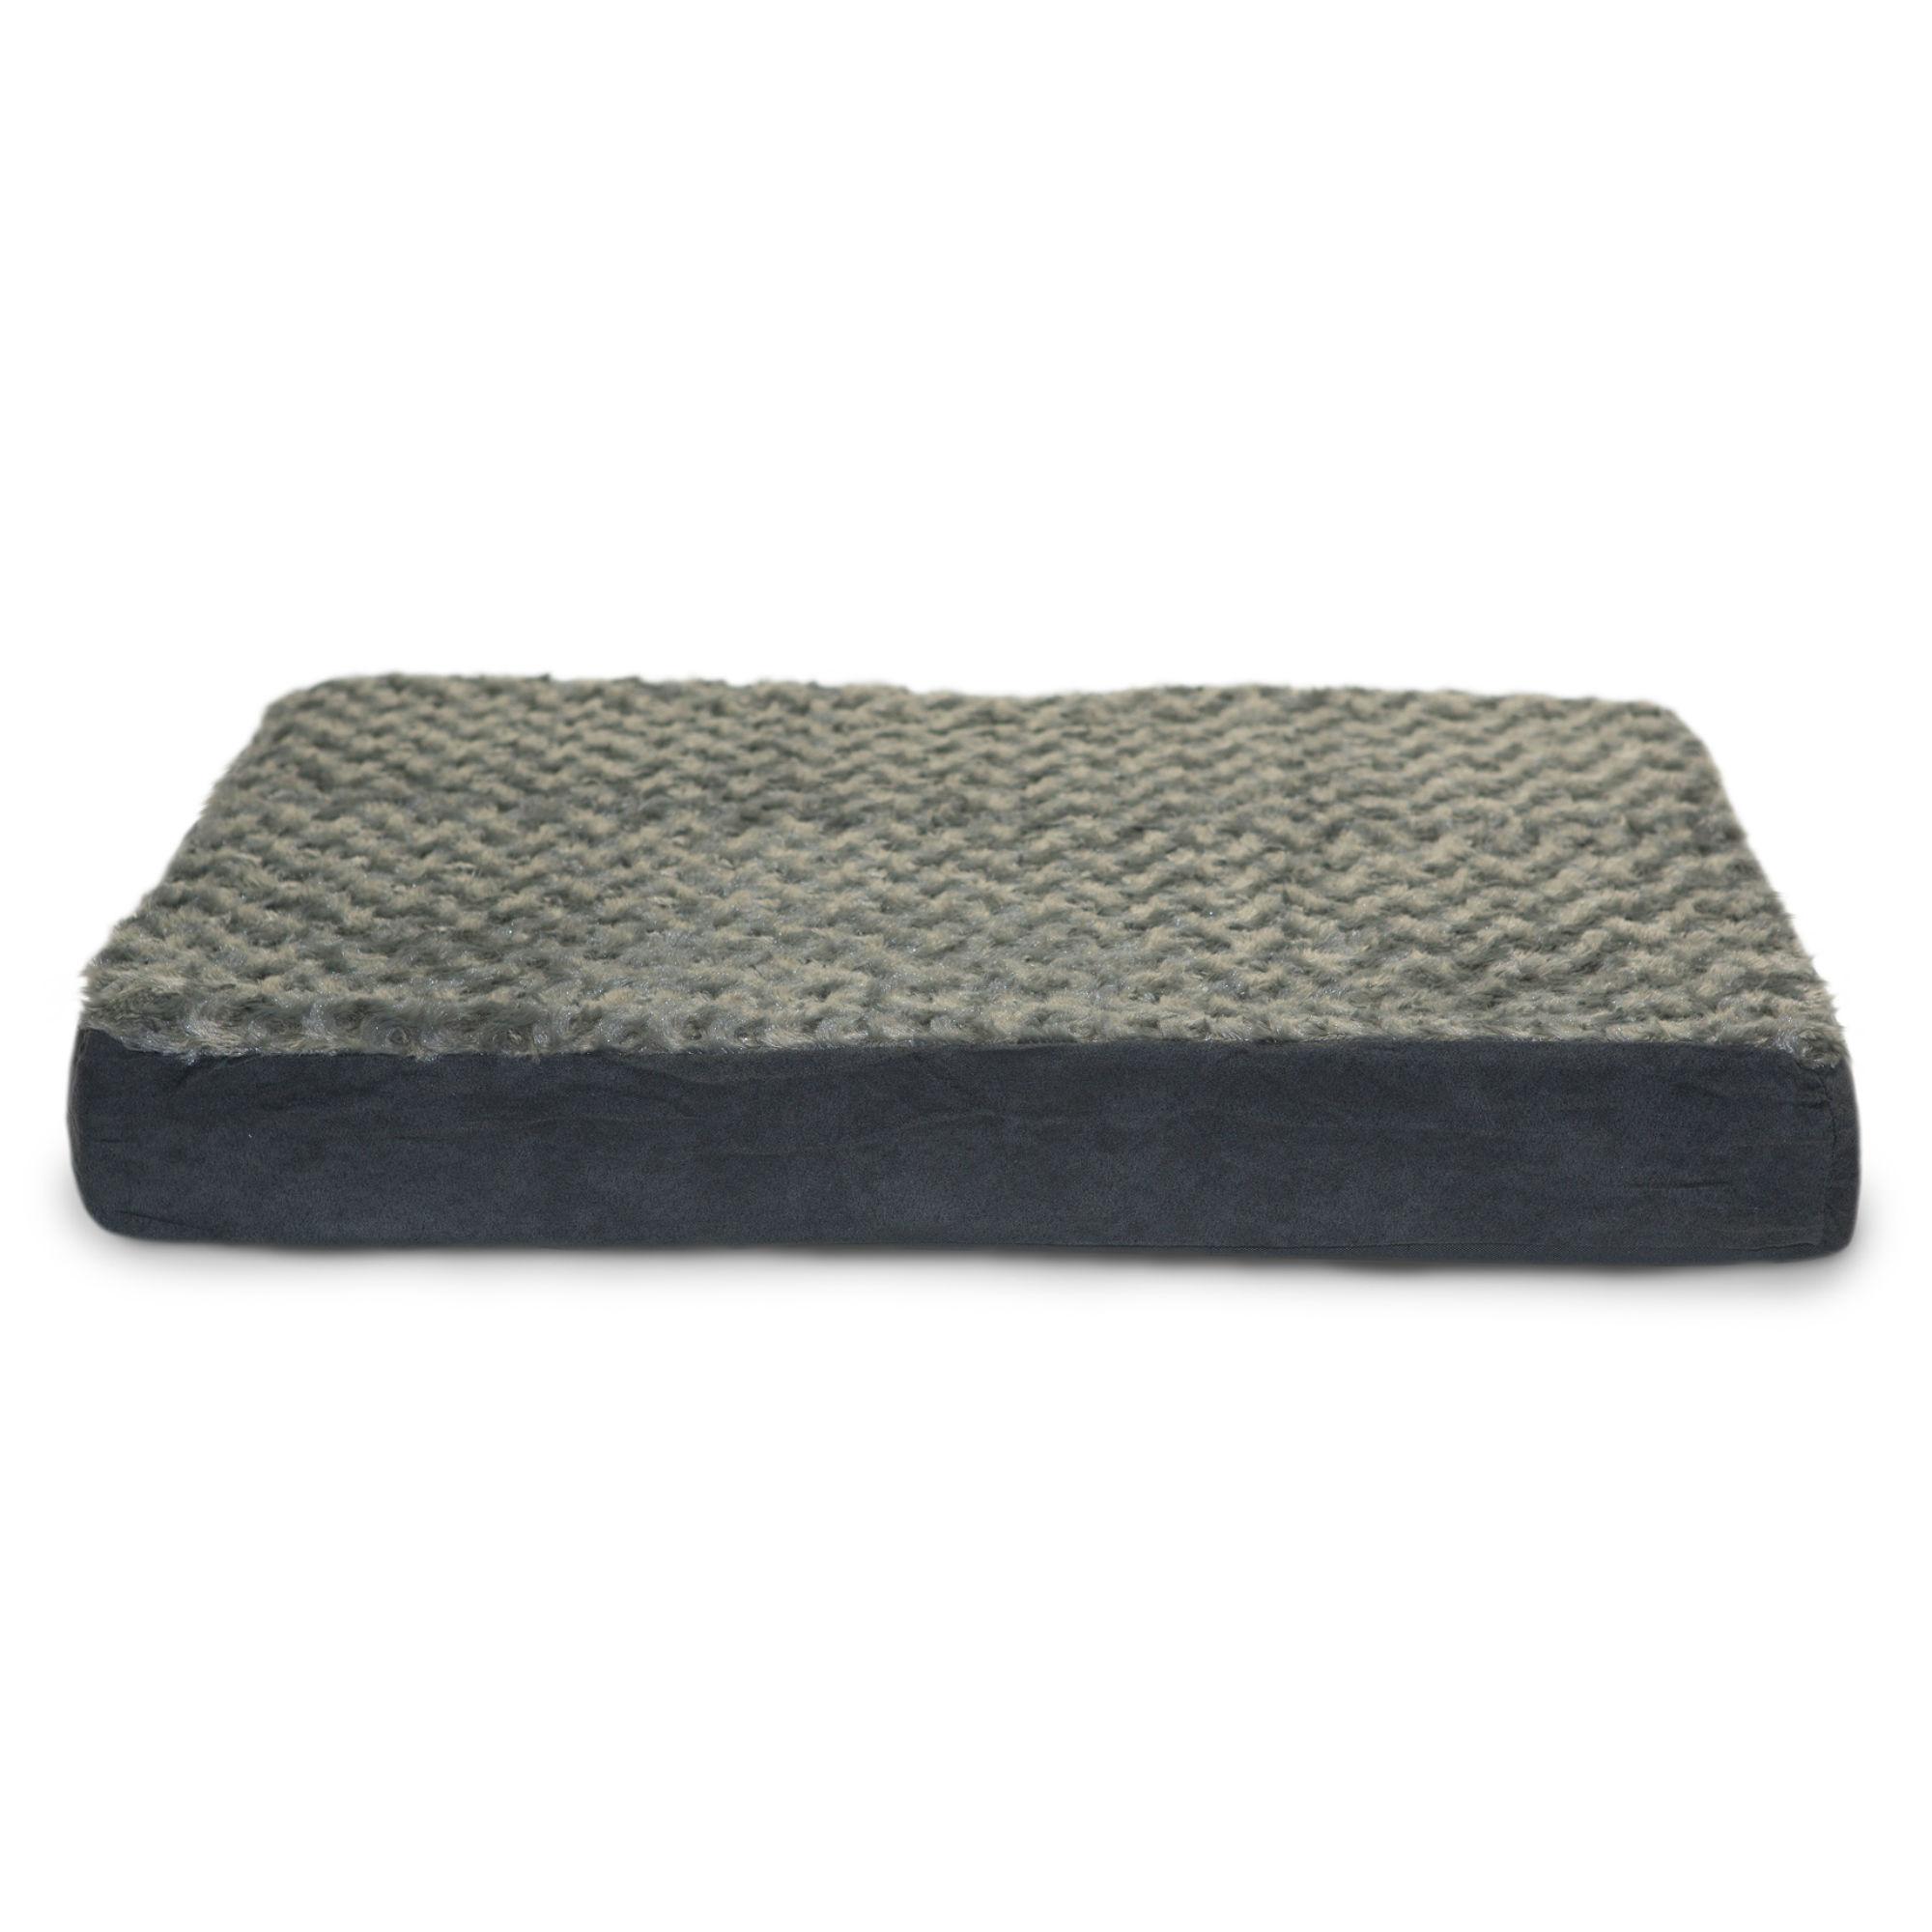 FurHaven Ultra Plush Deluxe Cooling Gel Top Pet Bed - Gray